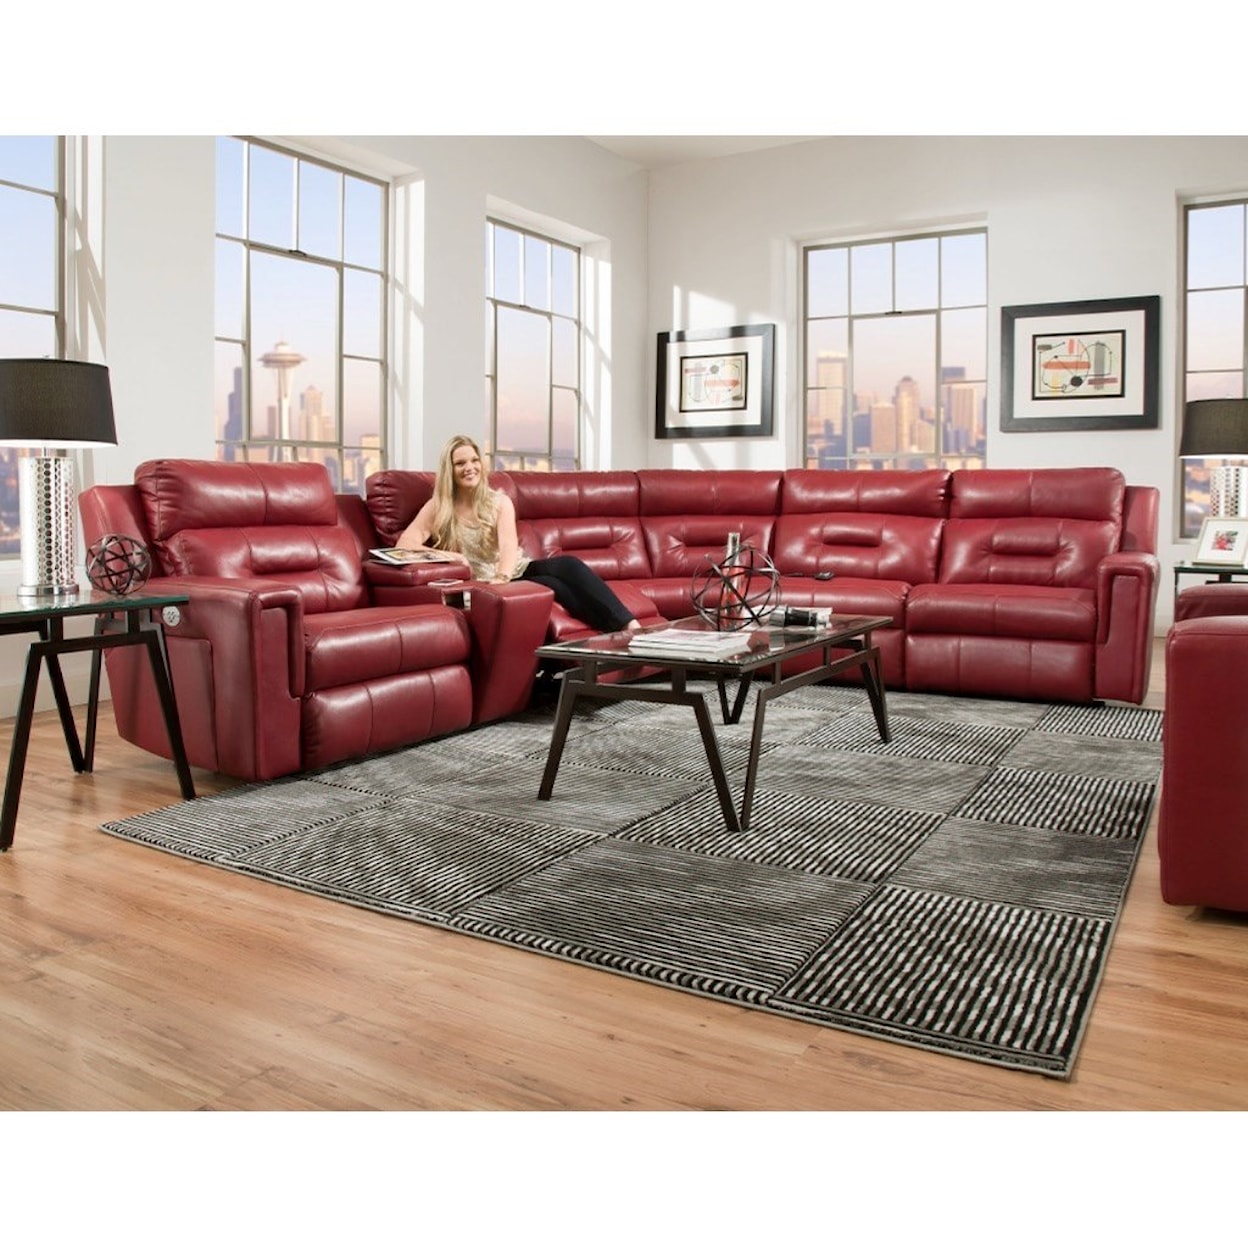 Design2Recline Excel Reclining Sectional Sofa with 5 Seats